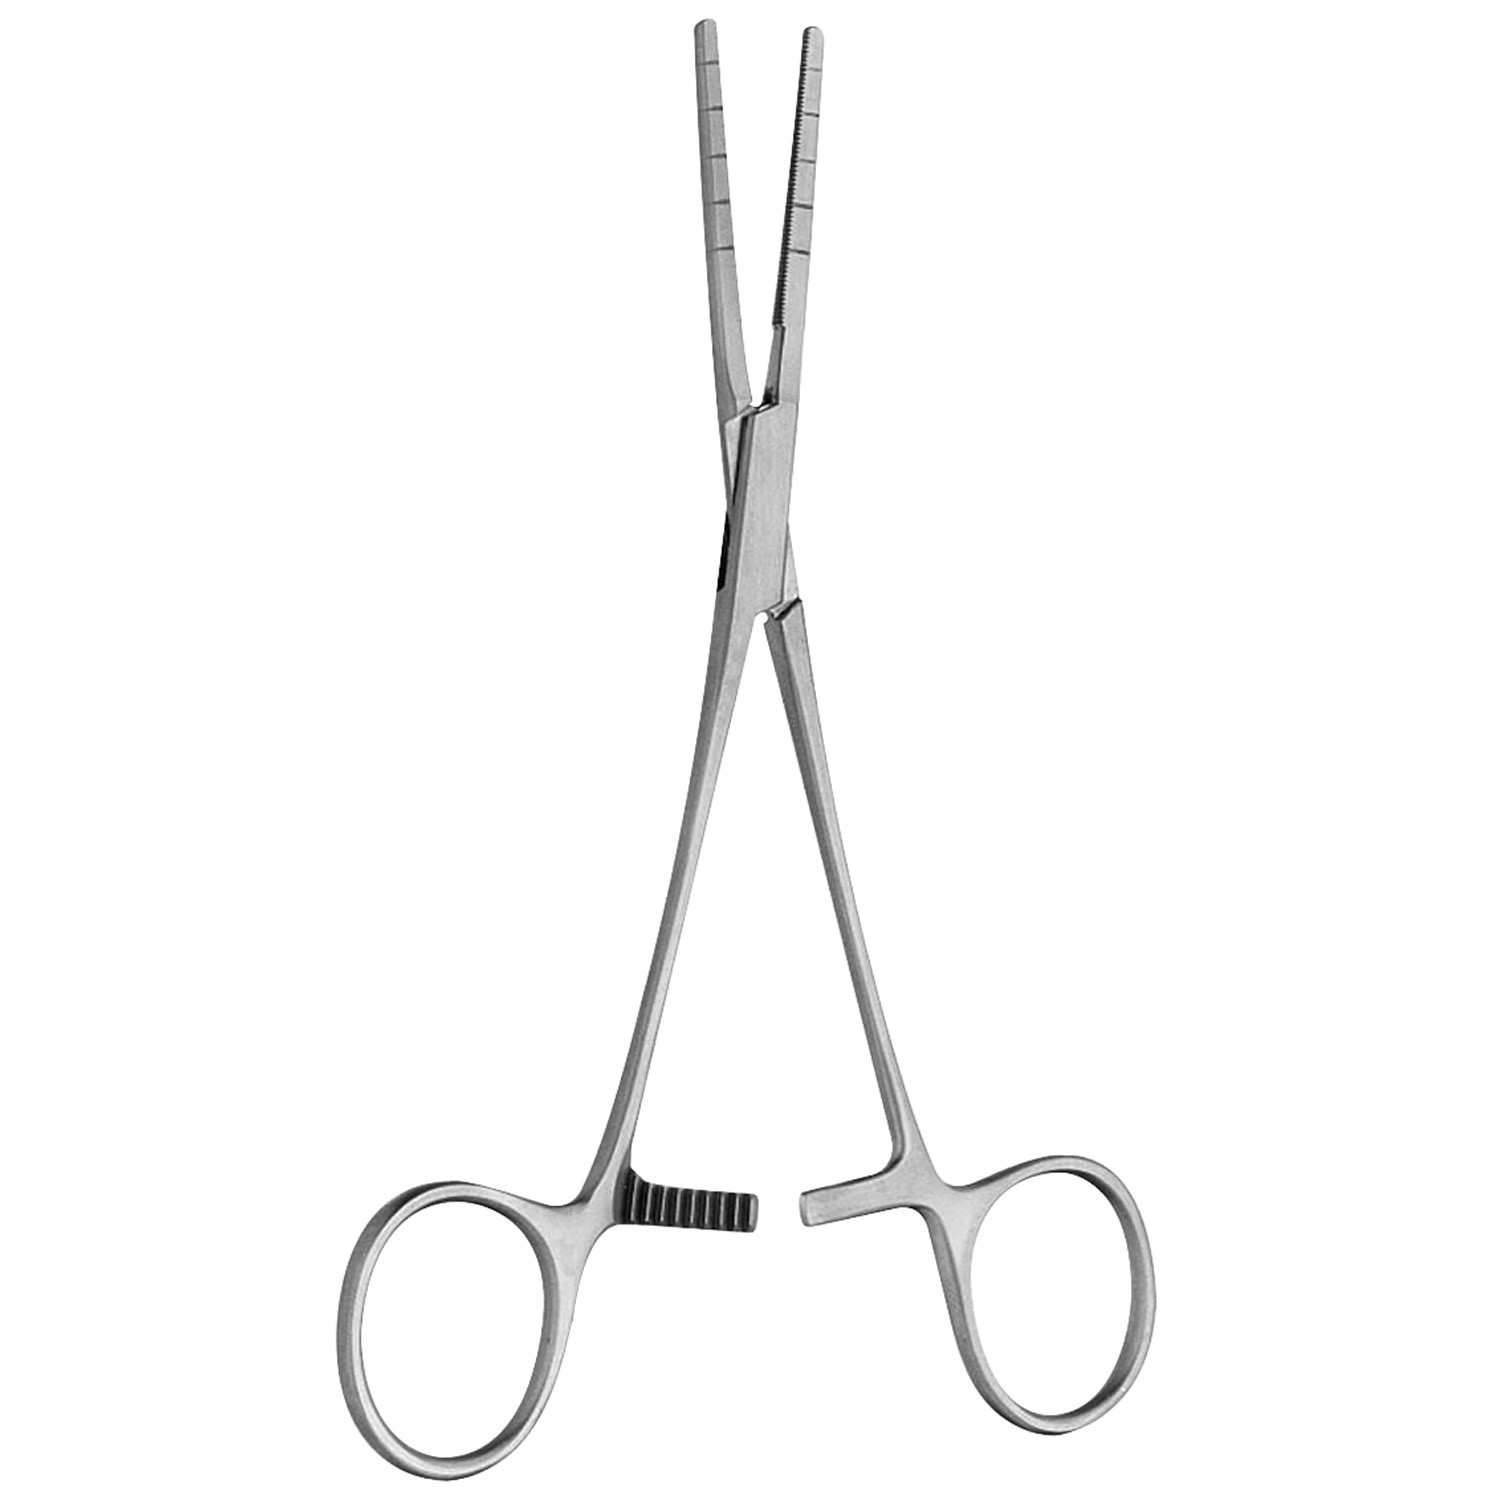 Cooley Patent Ductus Clamp, Jaws Calibrated At 5.0 Mm Intervals, 6 1/4" (16.0 Cm), Angular Shanks